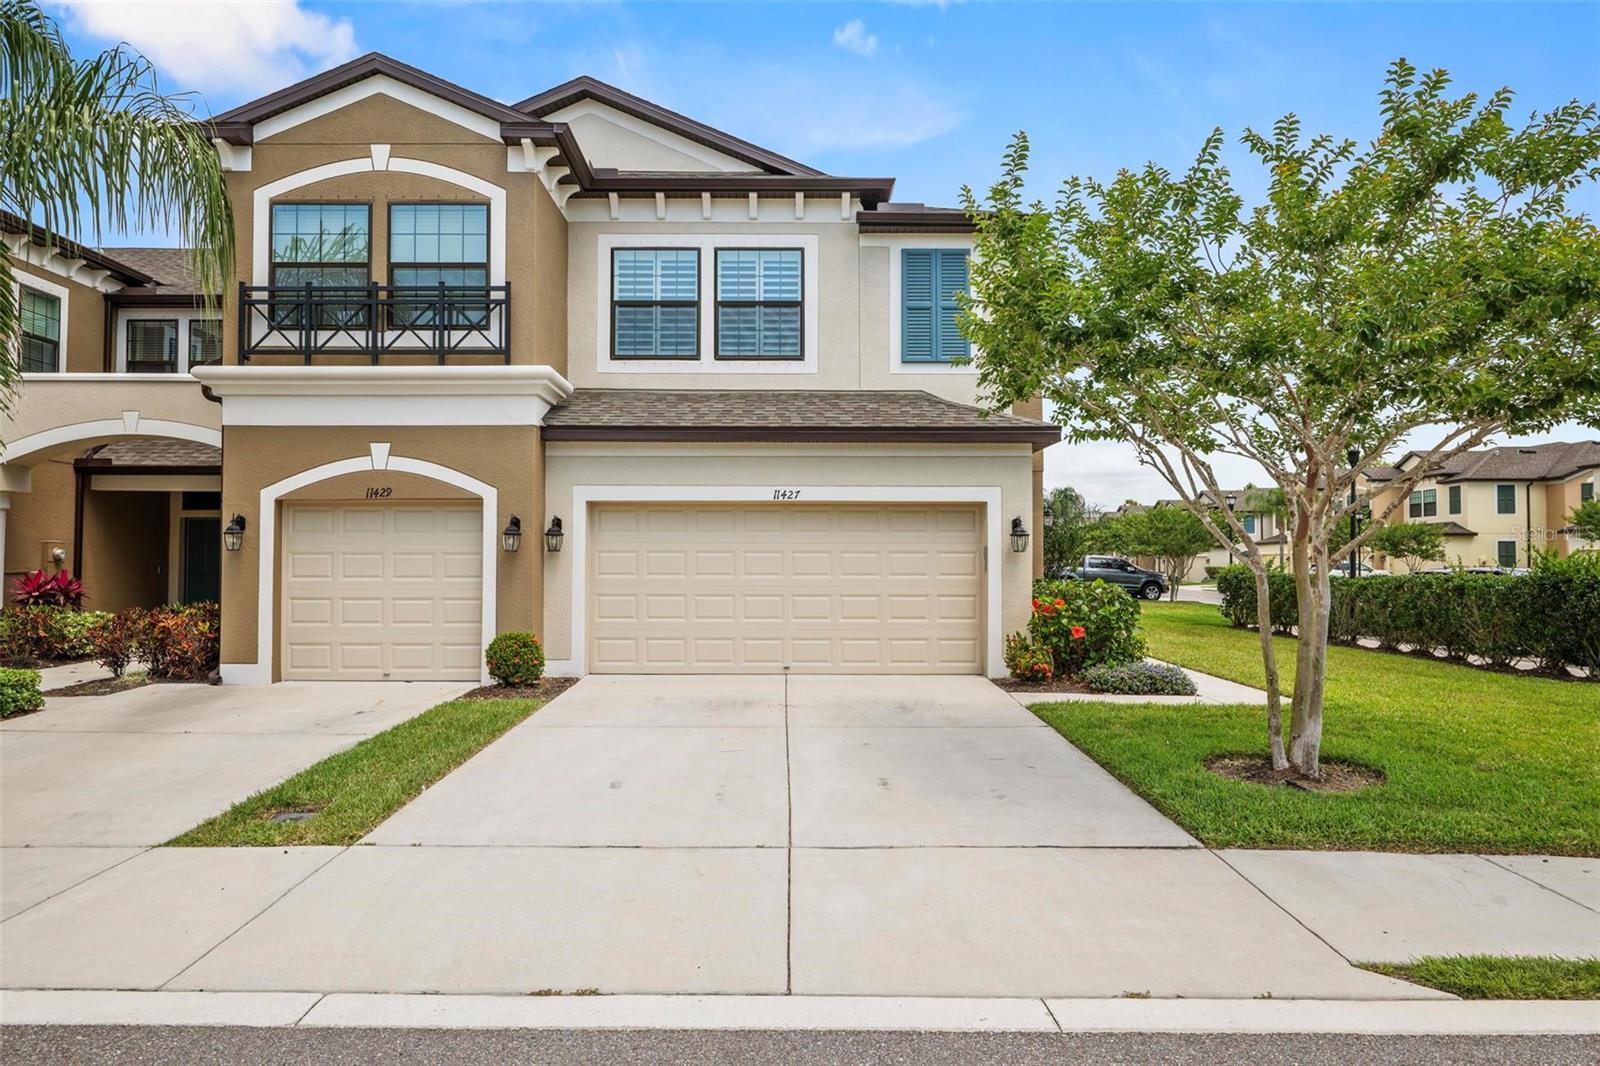 Photo one of 11427 Crowned Sparrow Ln Tampa FL 33626 | MLS T3521707